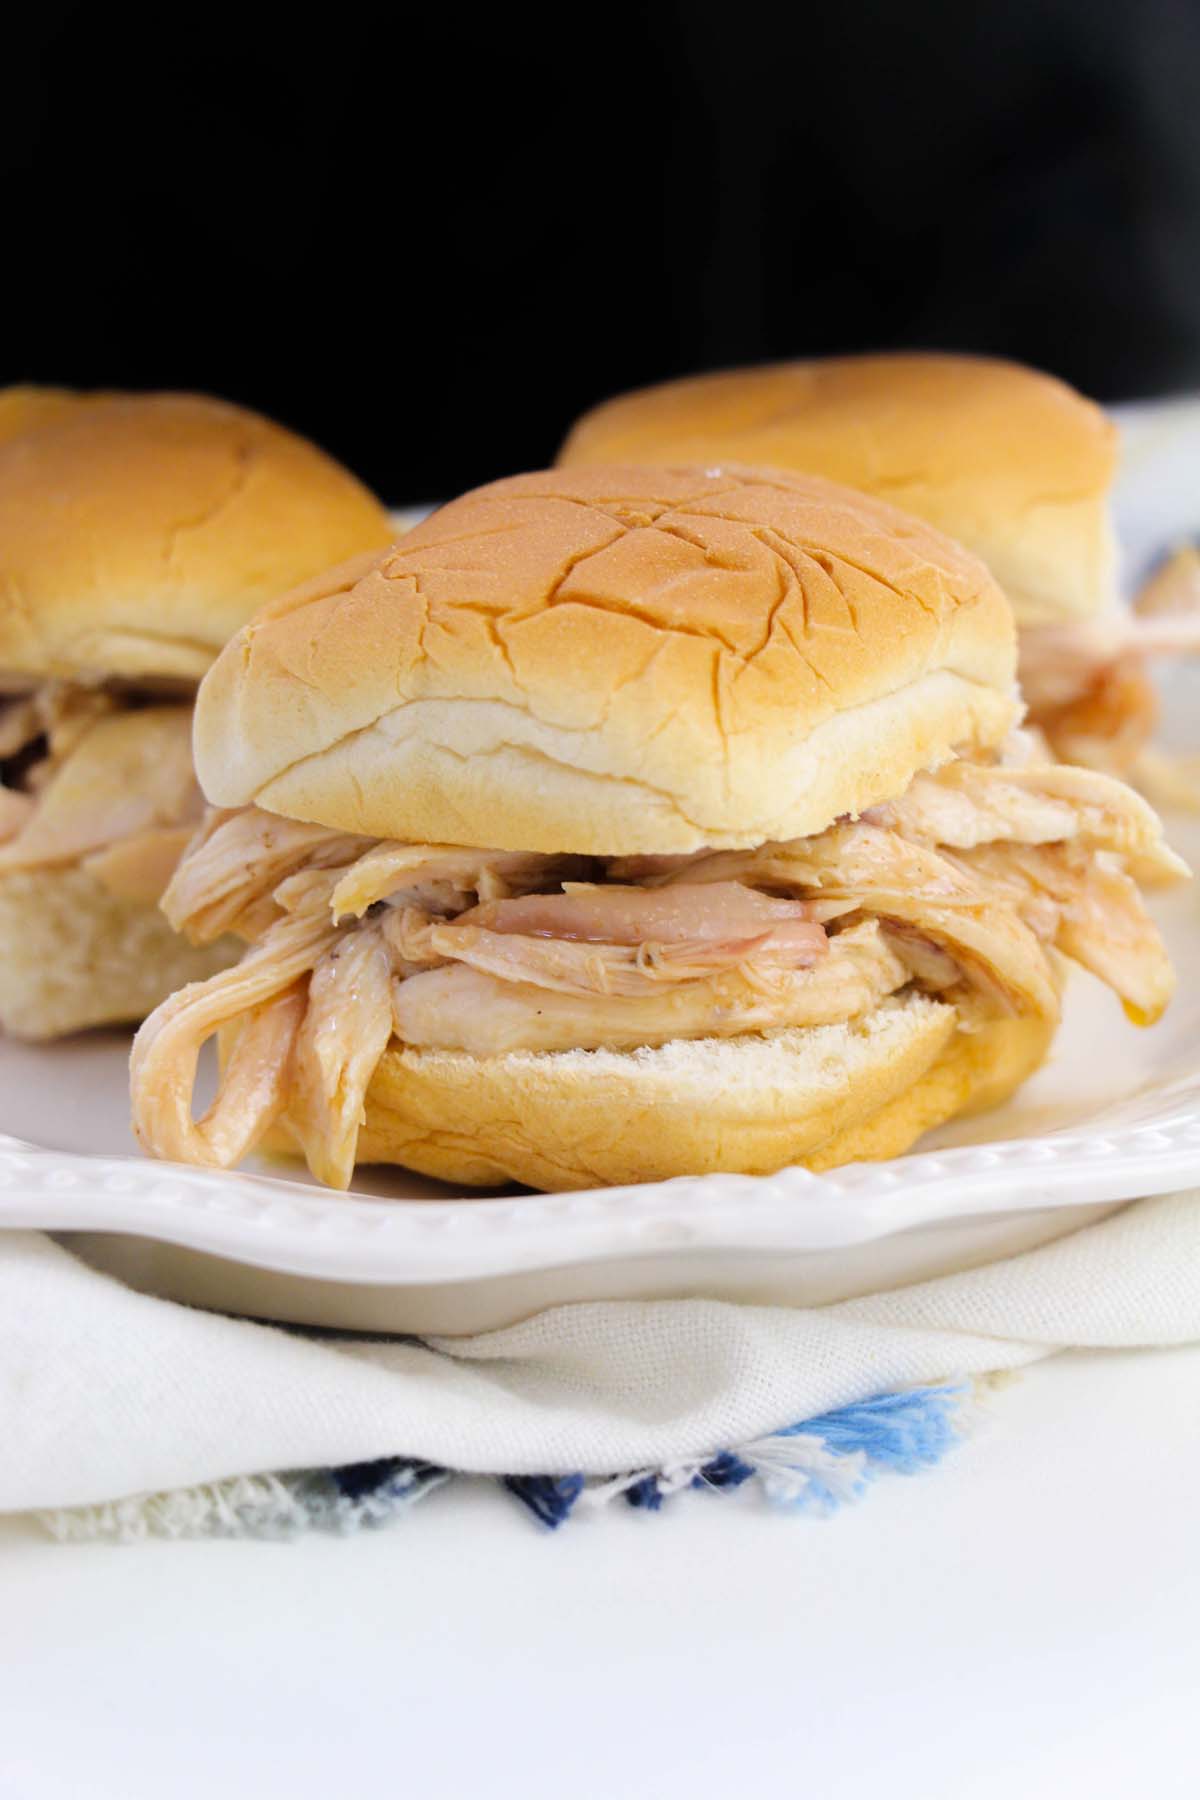 Shredded chicken sandwiches on a plate.